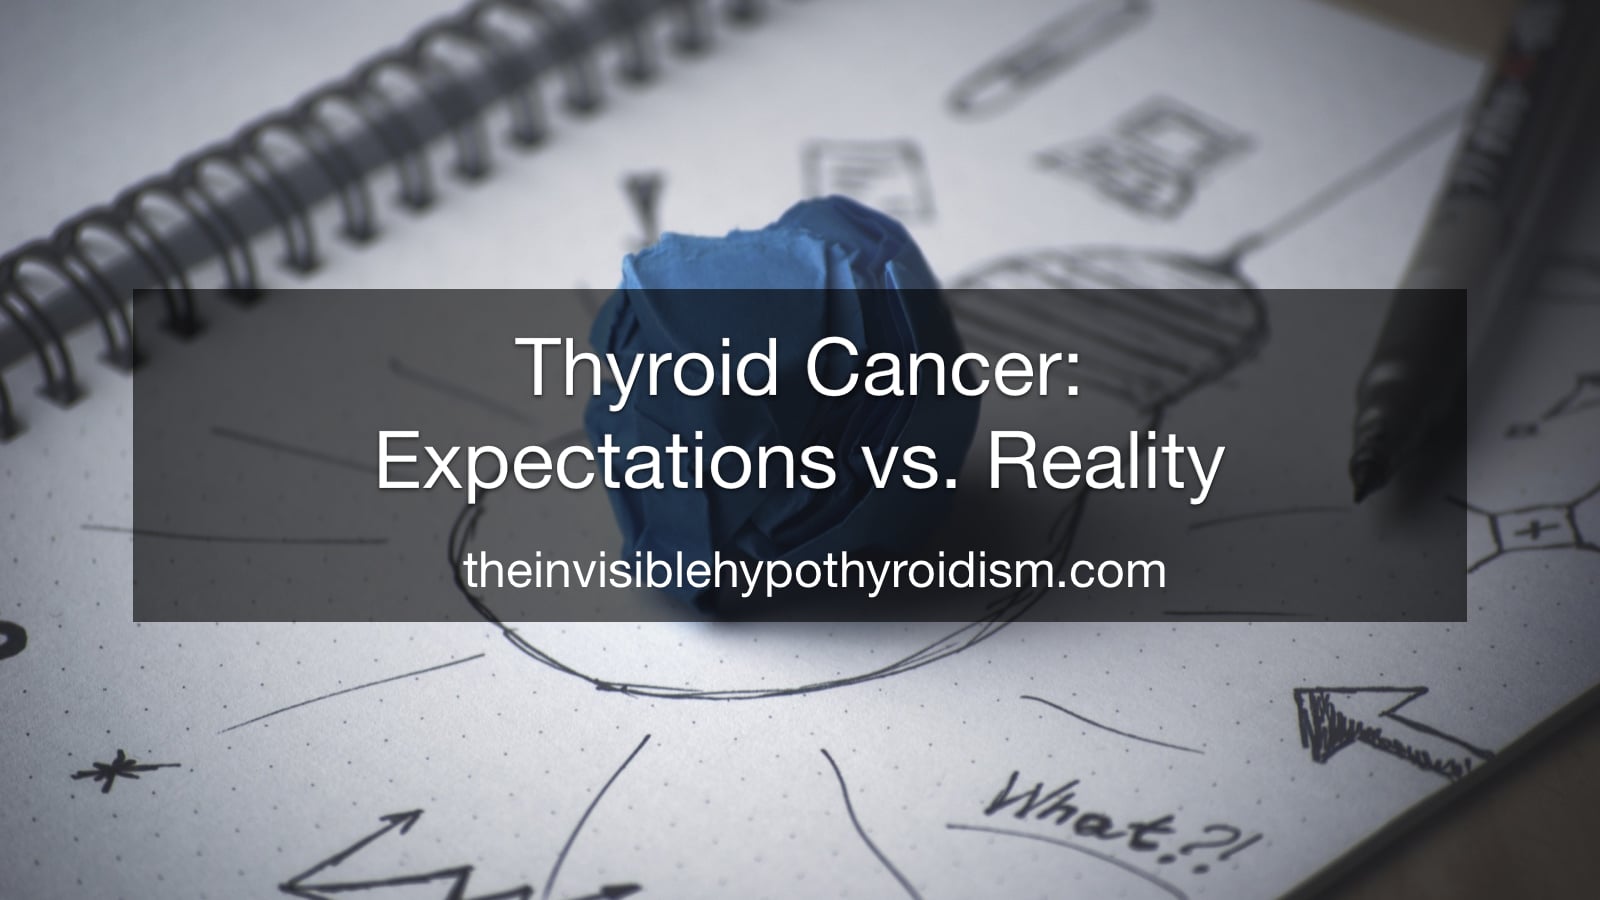 Thyroid Cancer: Expectations vs. Reality